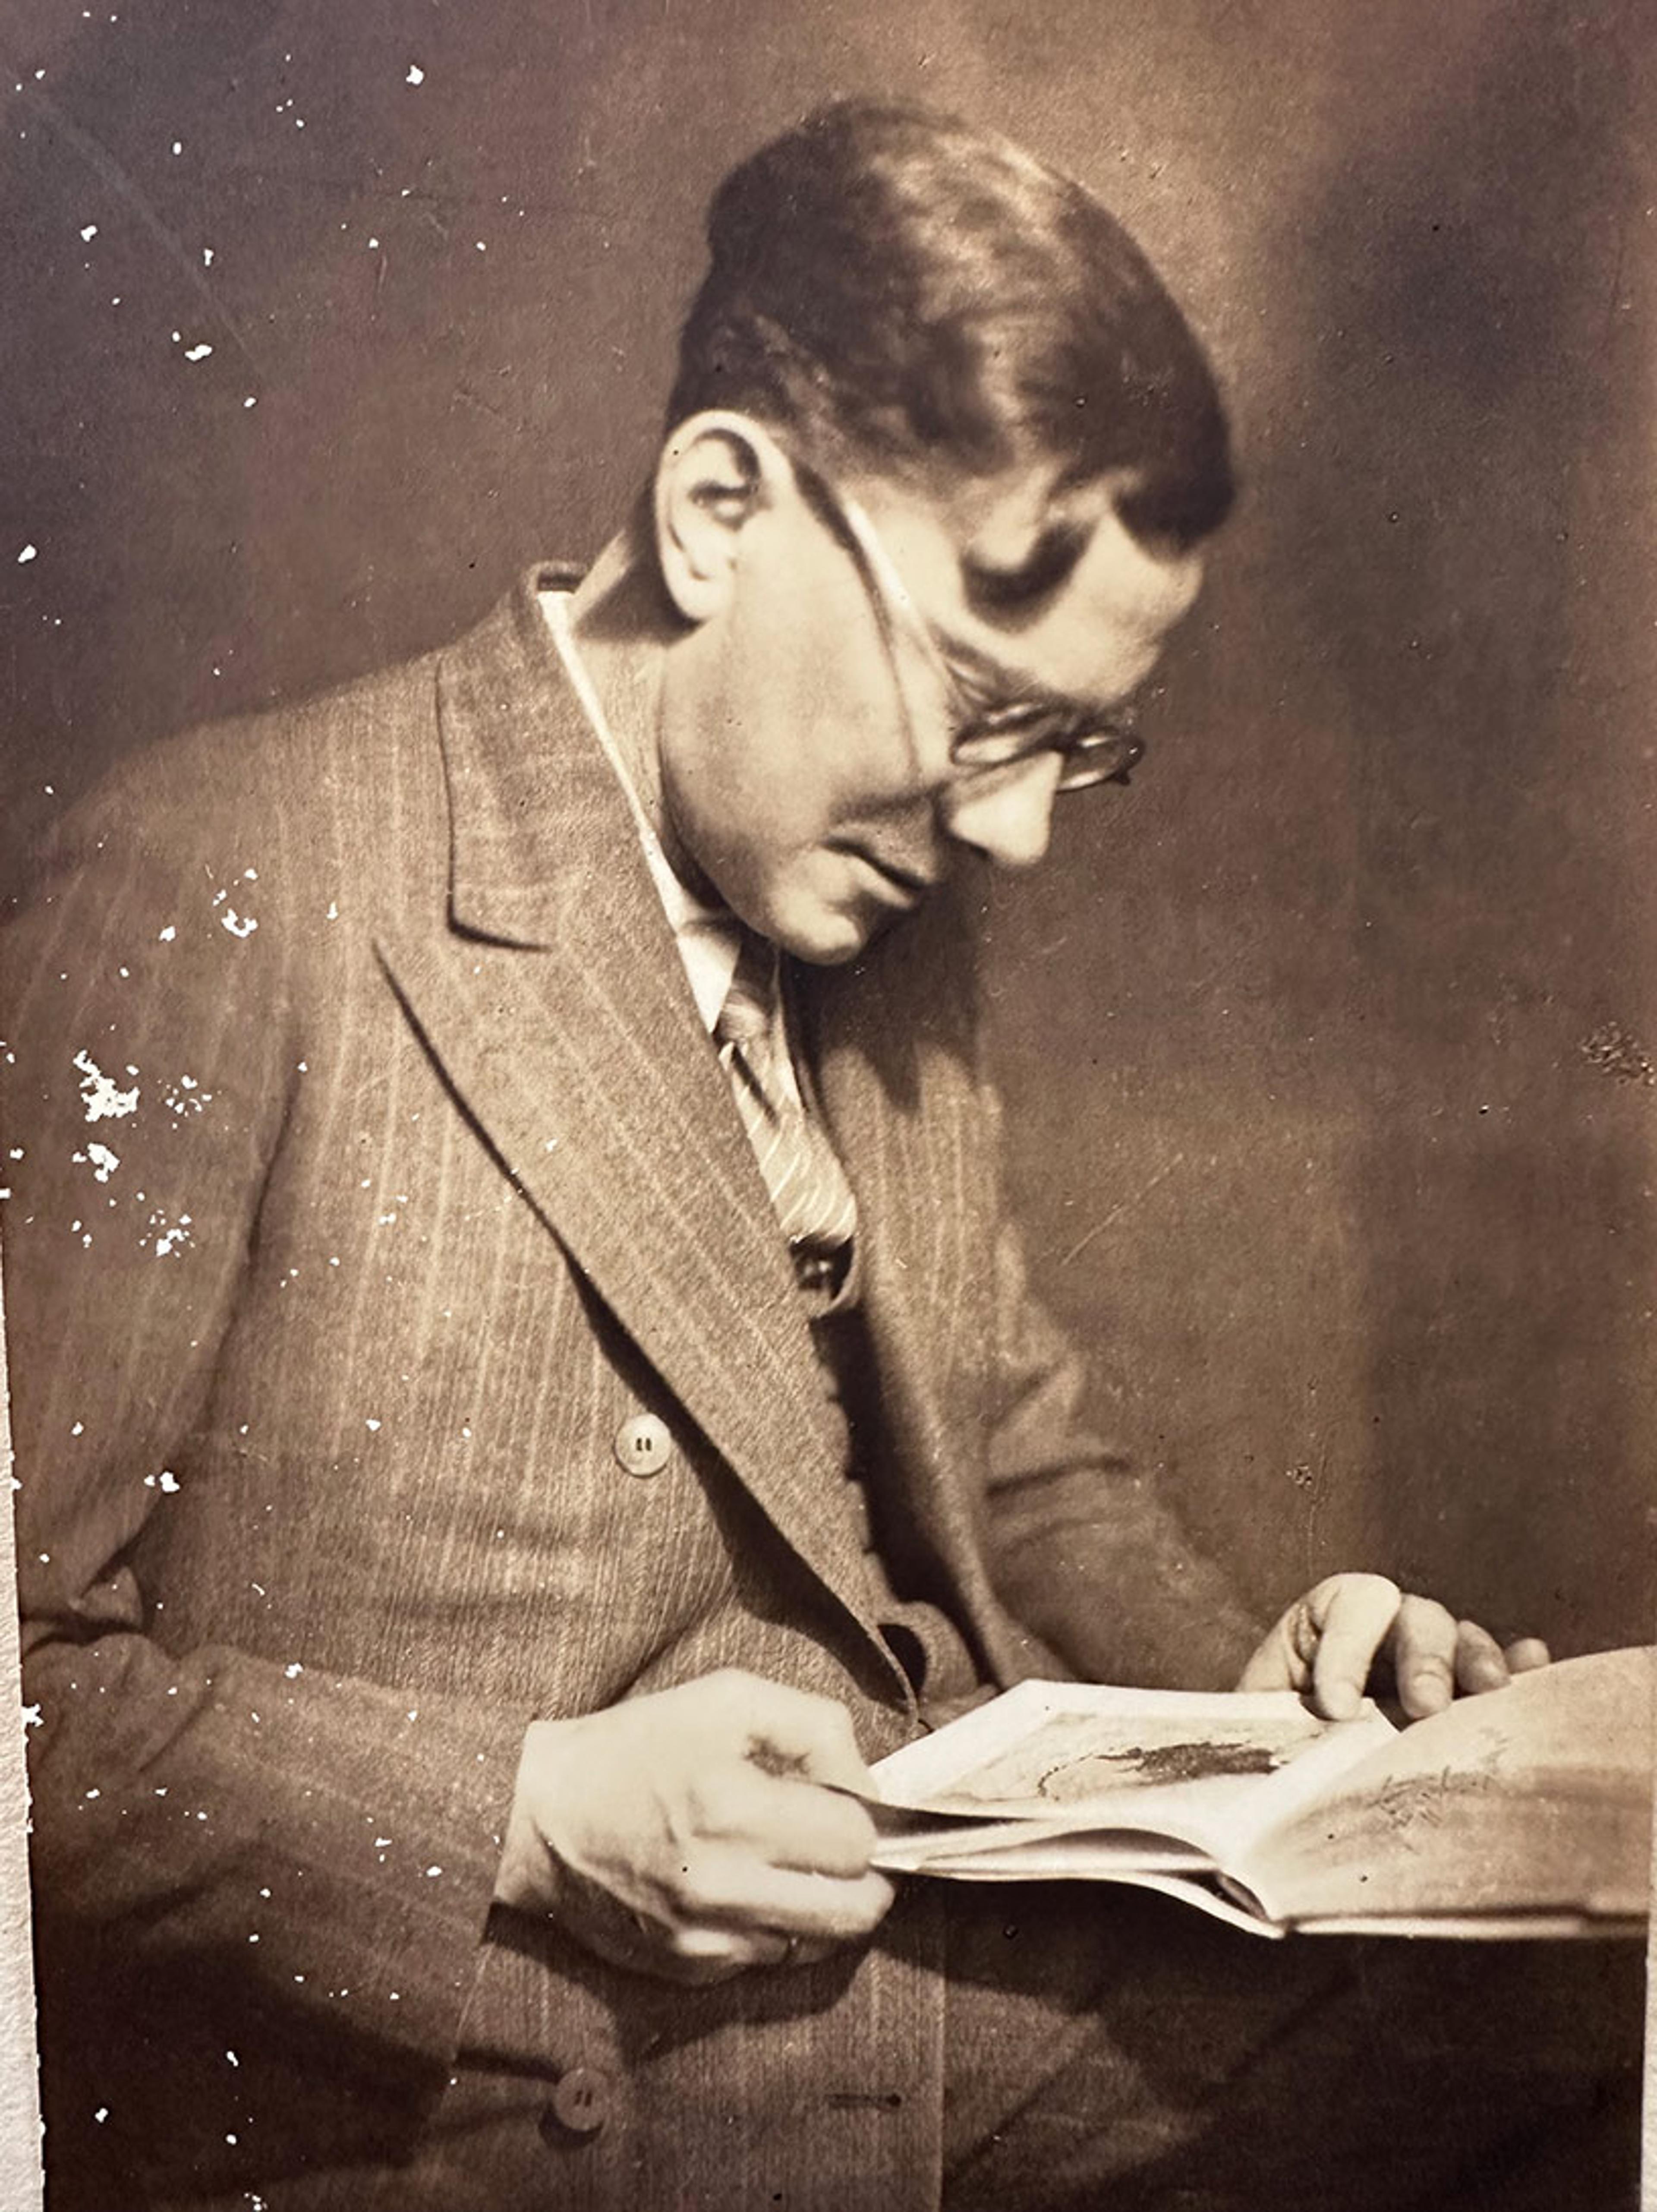 A sepia-tone photograph of a man with glasses and wavy hair, dressed in a pinstriped suit with a tie, engrossed in reading an open book. The image has visible wear and speckling, giving it a vintage feel.